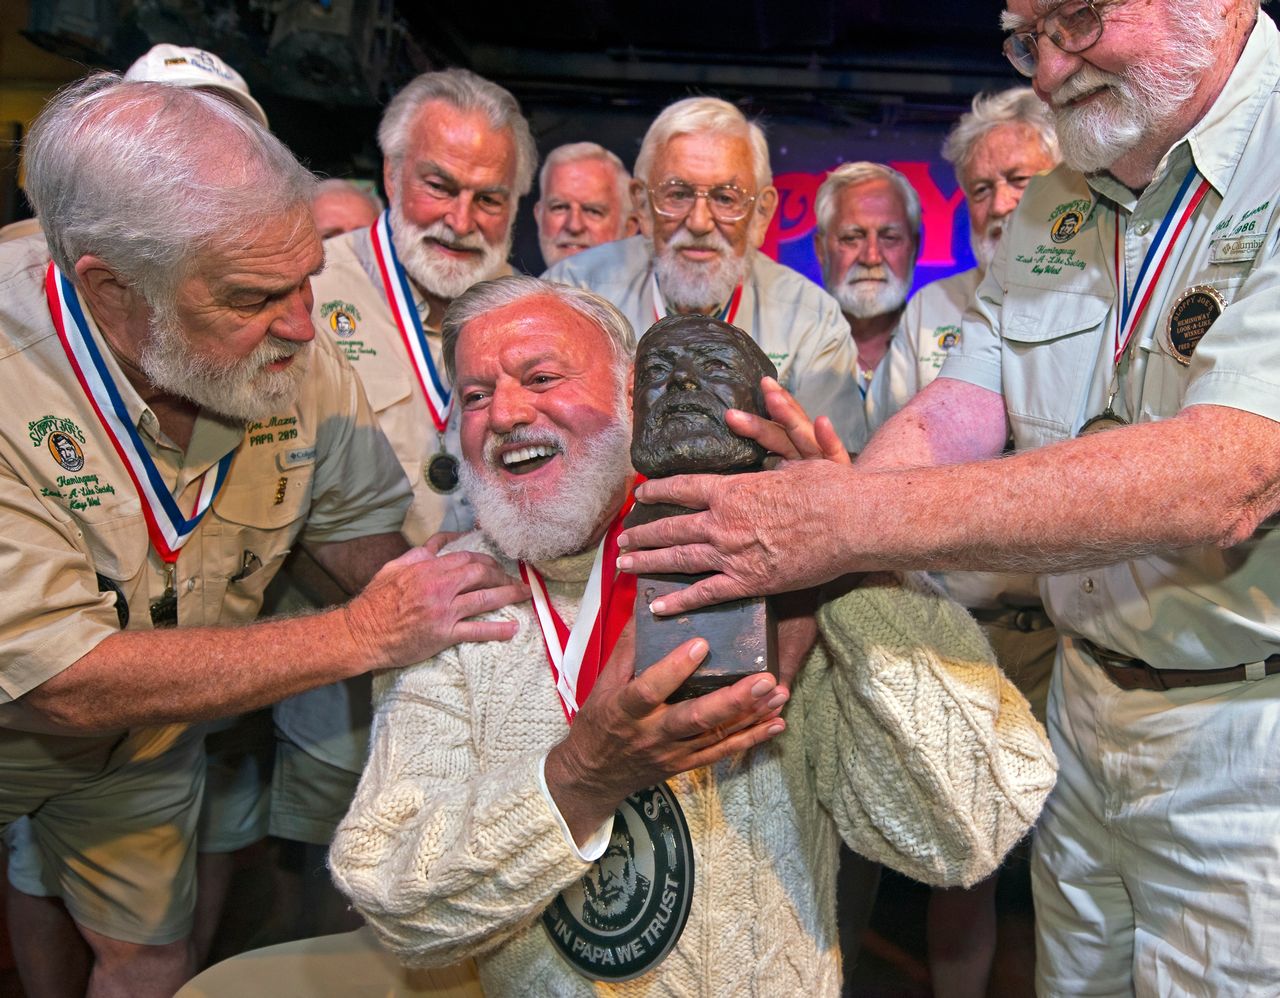 Jon Auvil, center, receives an Ernest Hemingway bust and congratulations after he won the 2022 Hemingway Look-Alike Contest at Sloppy Joe’s Bar in Key West. Photo: Andy Newman